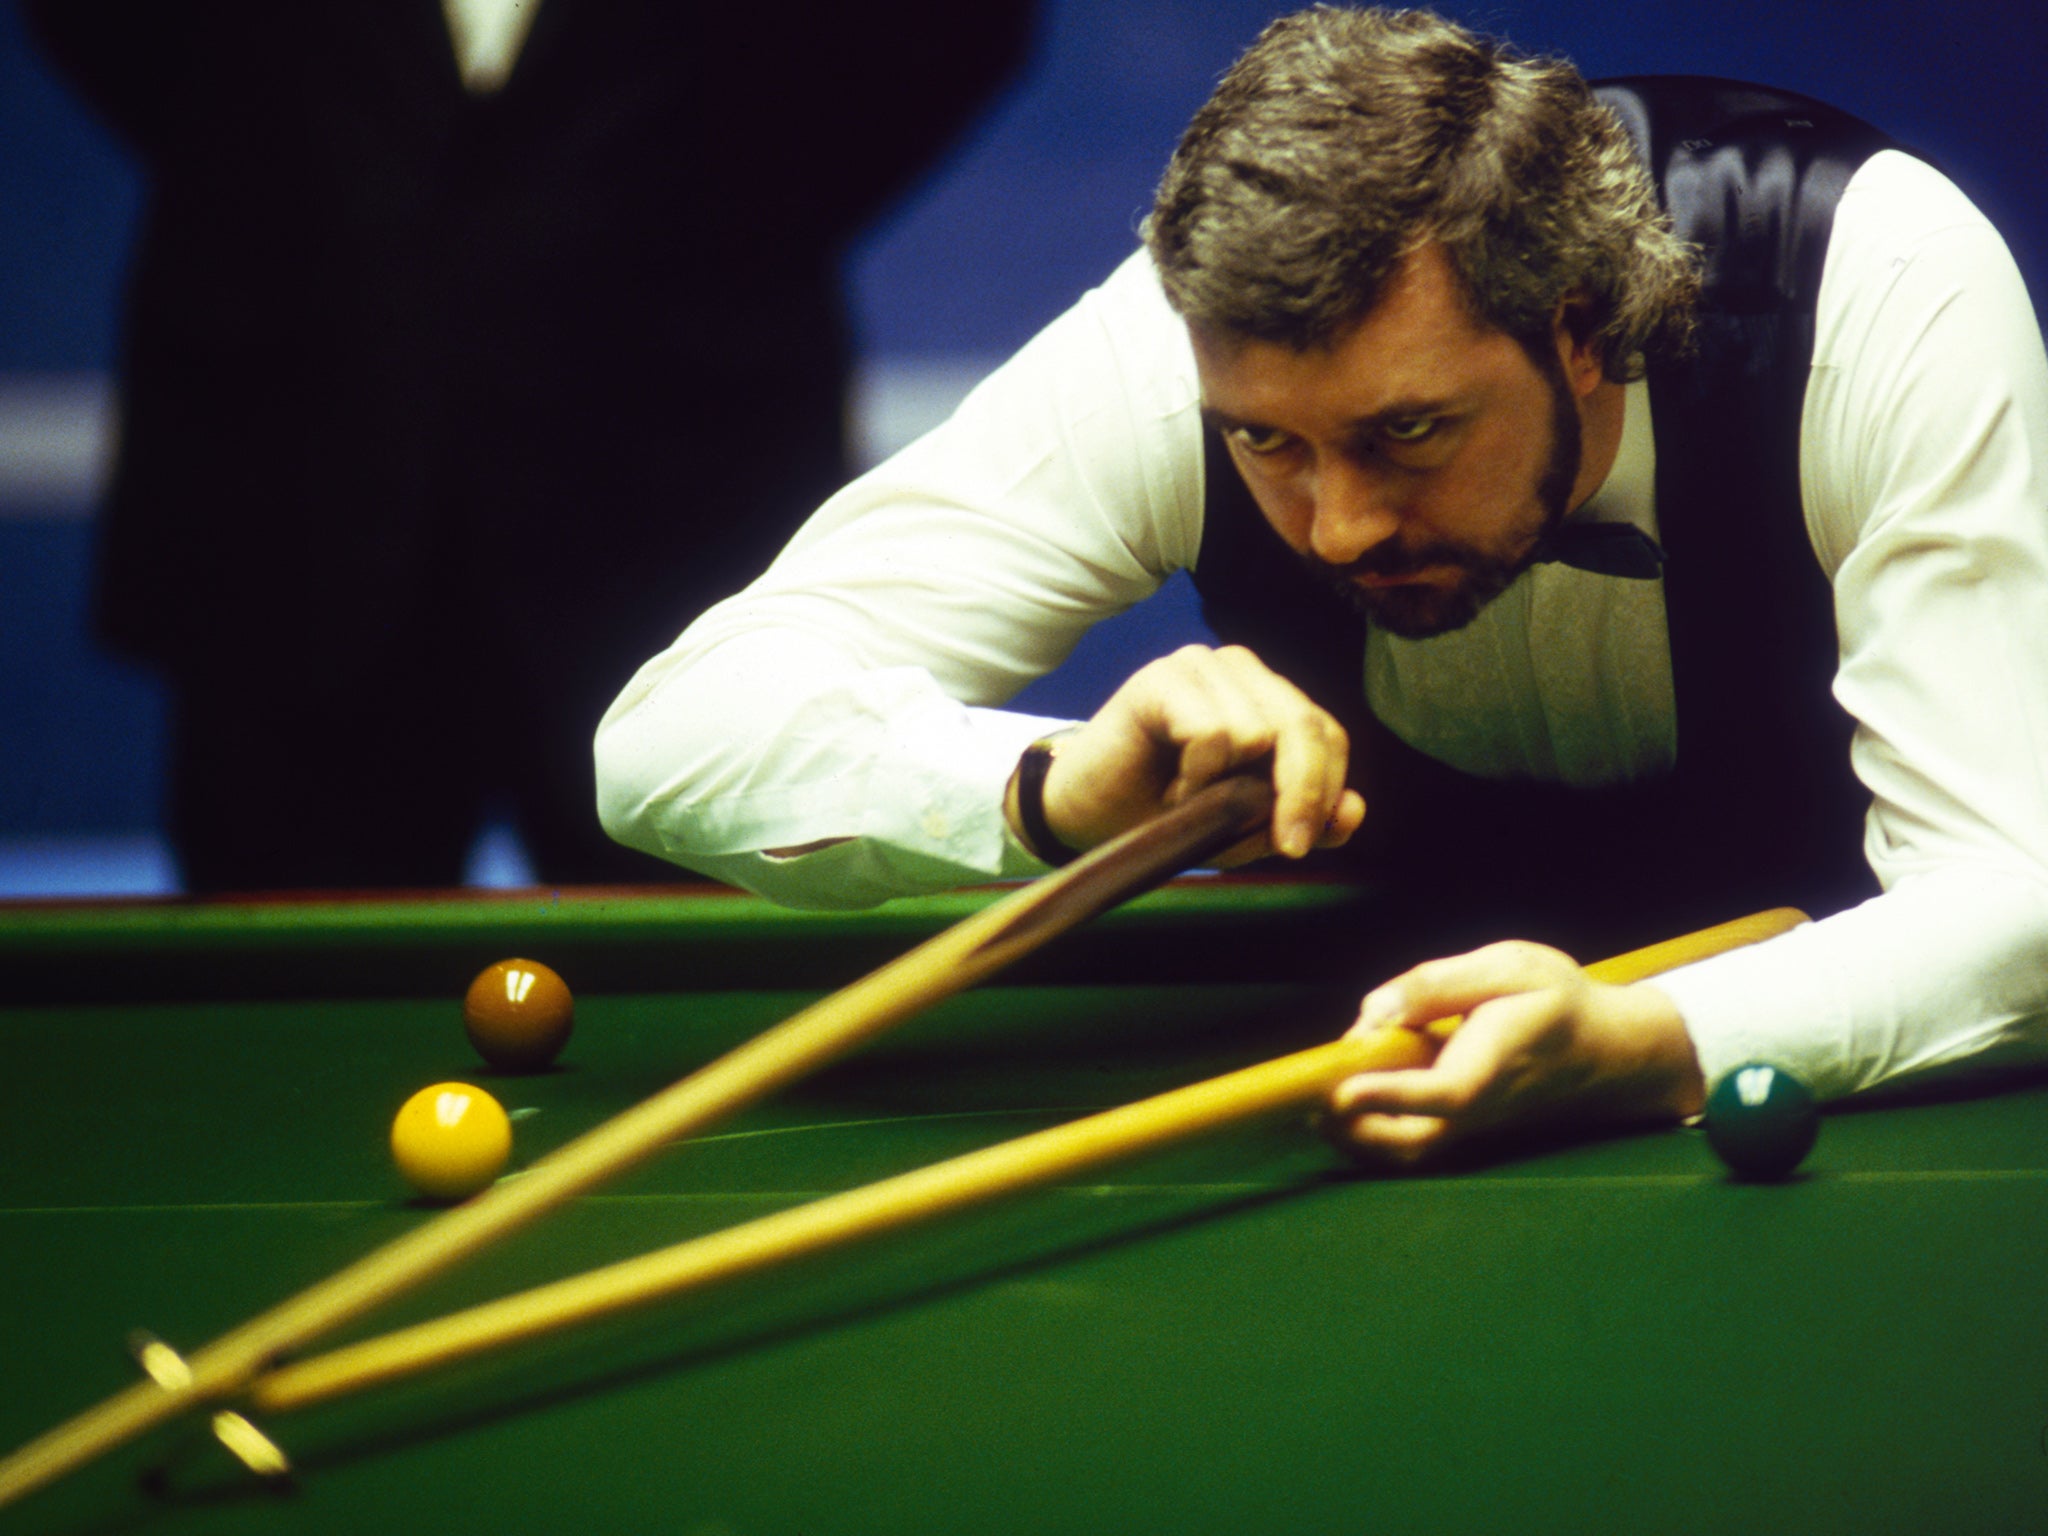 Virgo in action during the 1987 Embassy World Snooker Championship at the Crucible